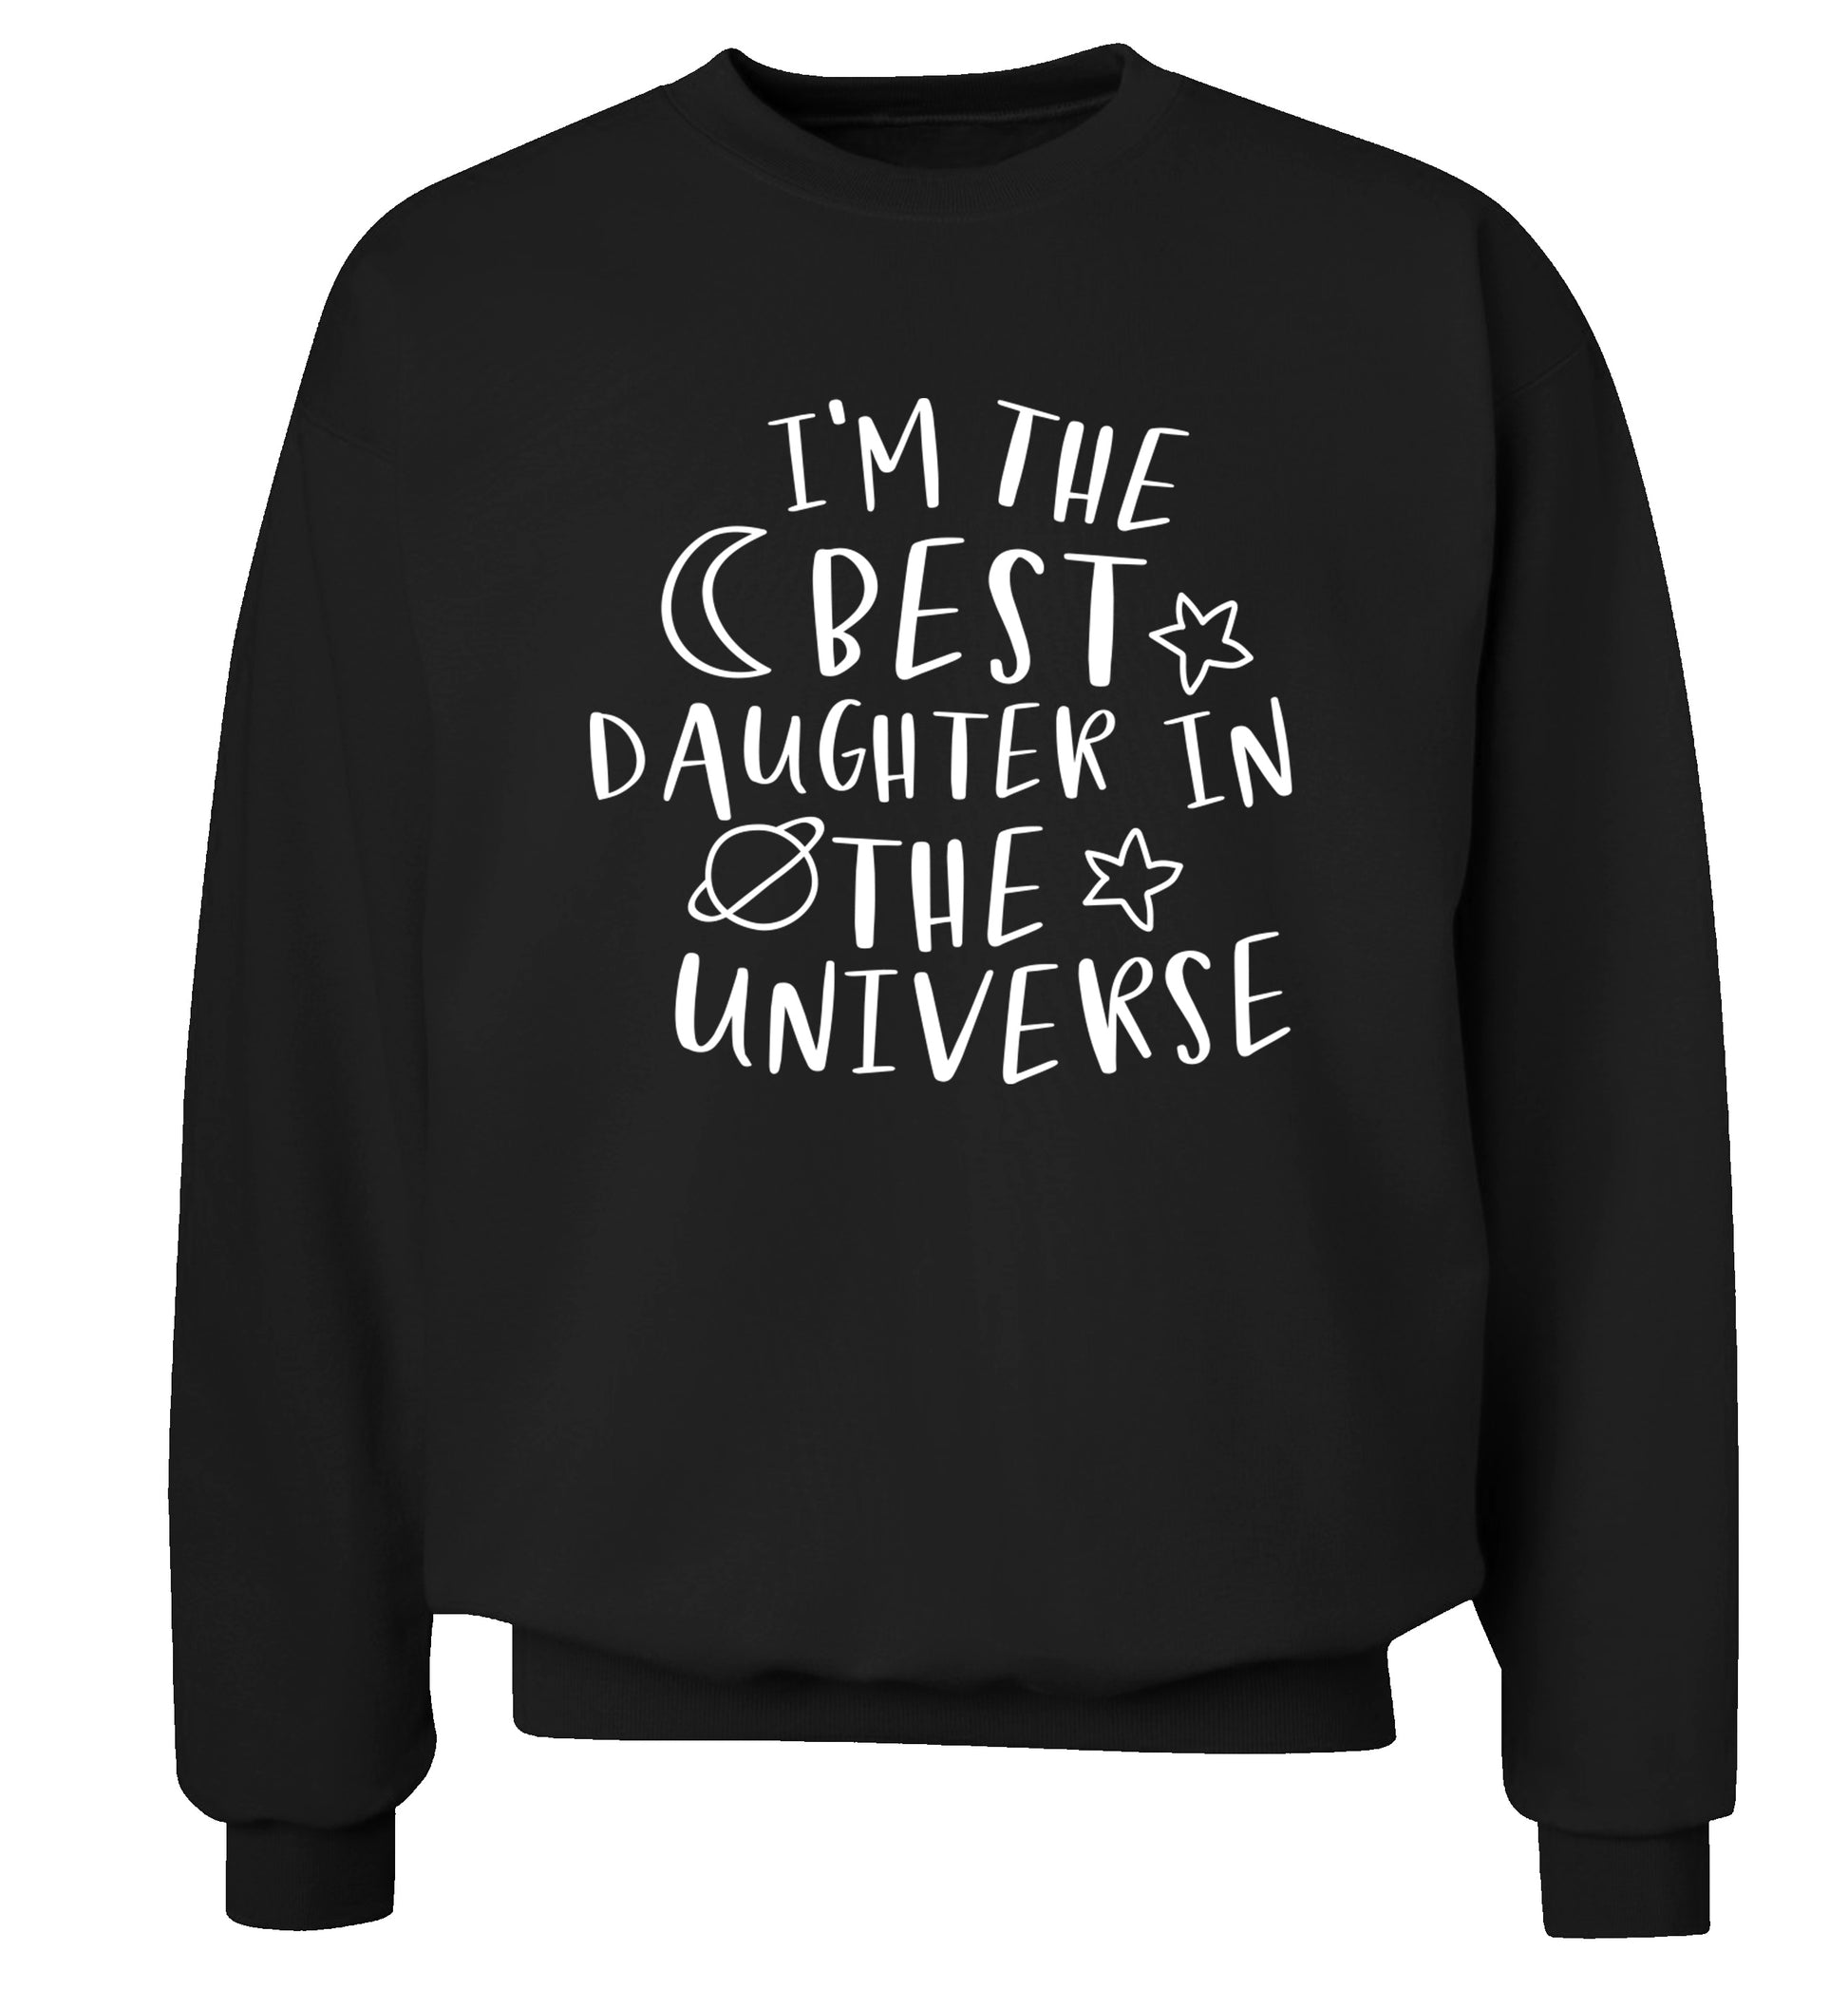 I'm the best daughter in the universe Adult's unisex black Sweater 2XL